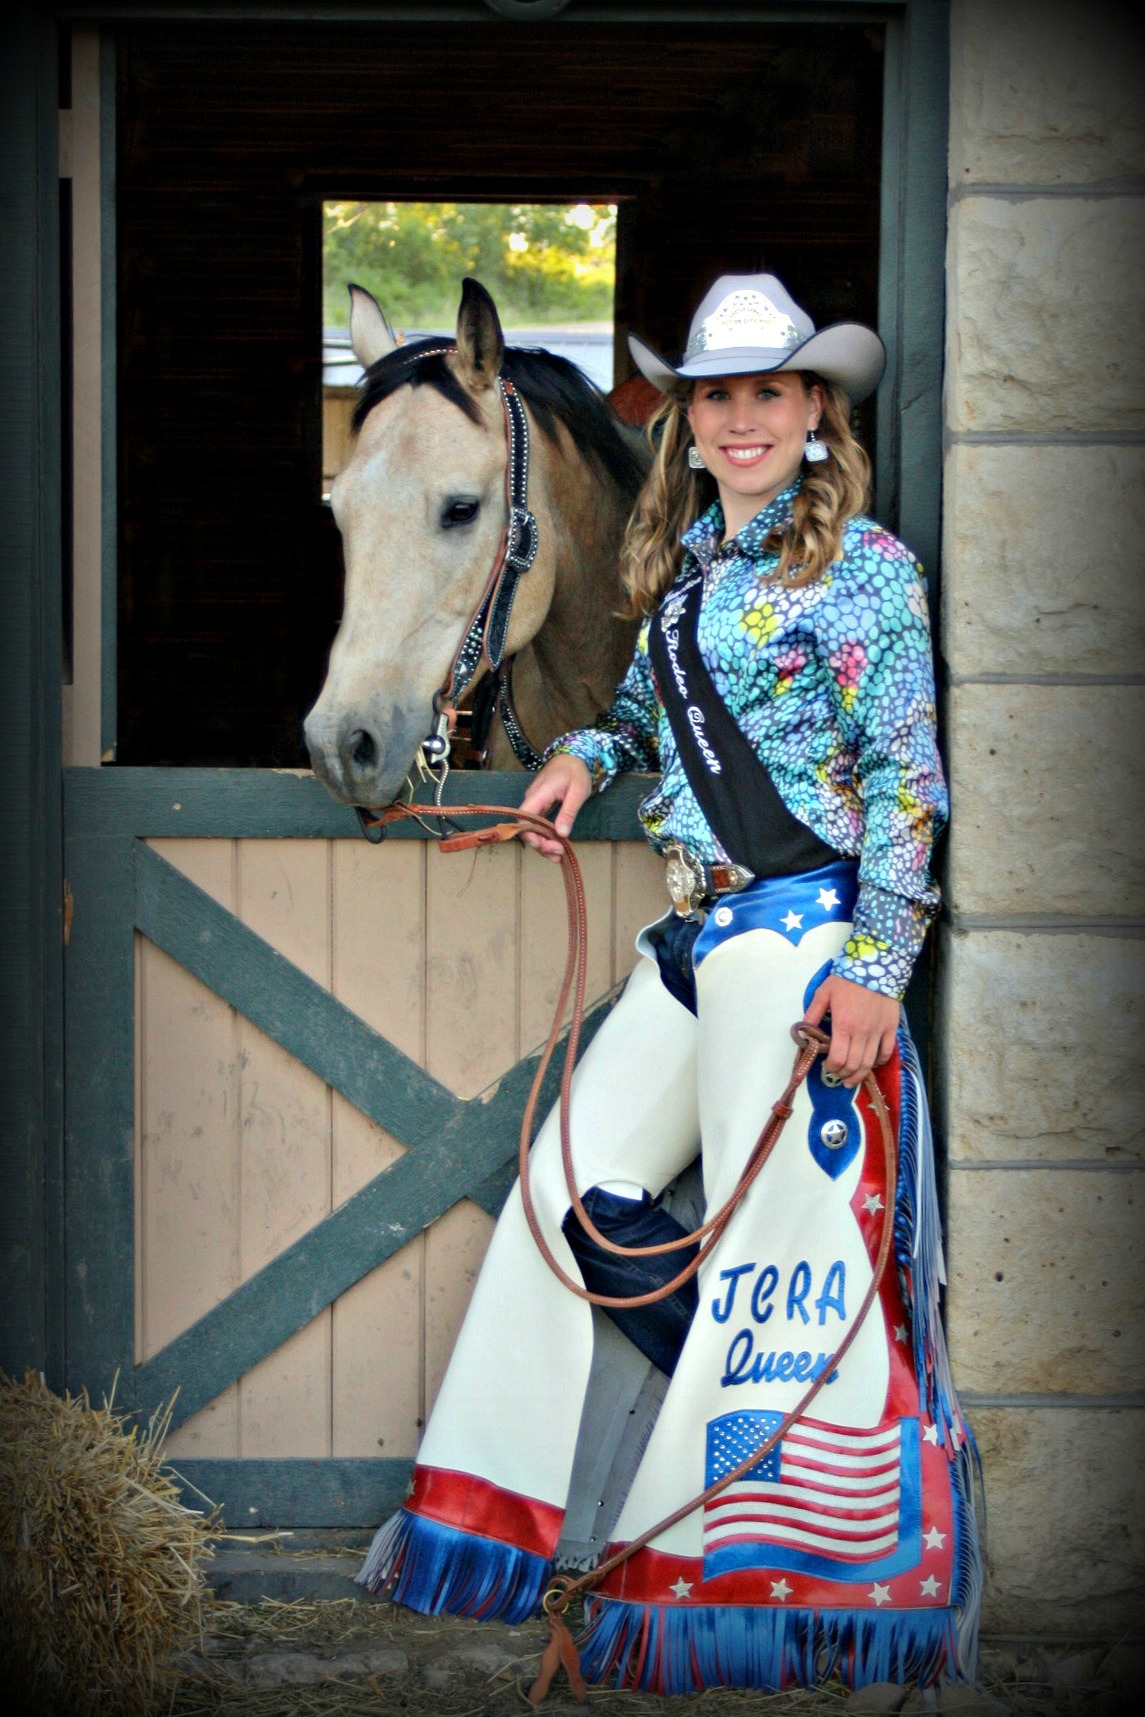 With her Quarter Horse called Boondoc, Shayla Lowry spread the good word about rodeo and its important heritage while serving as the Junction City Rodeo Queen. A student at Kansas State University, Lowry was crowned as the Eureka Rodeo Queen this summer and is continuing to attend and assist with rodeos and horse-related activities throughout the Midwest.